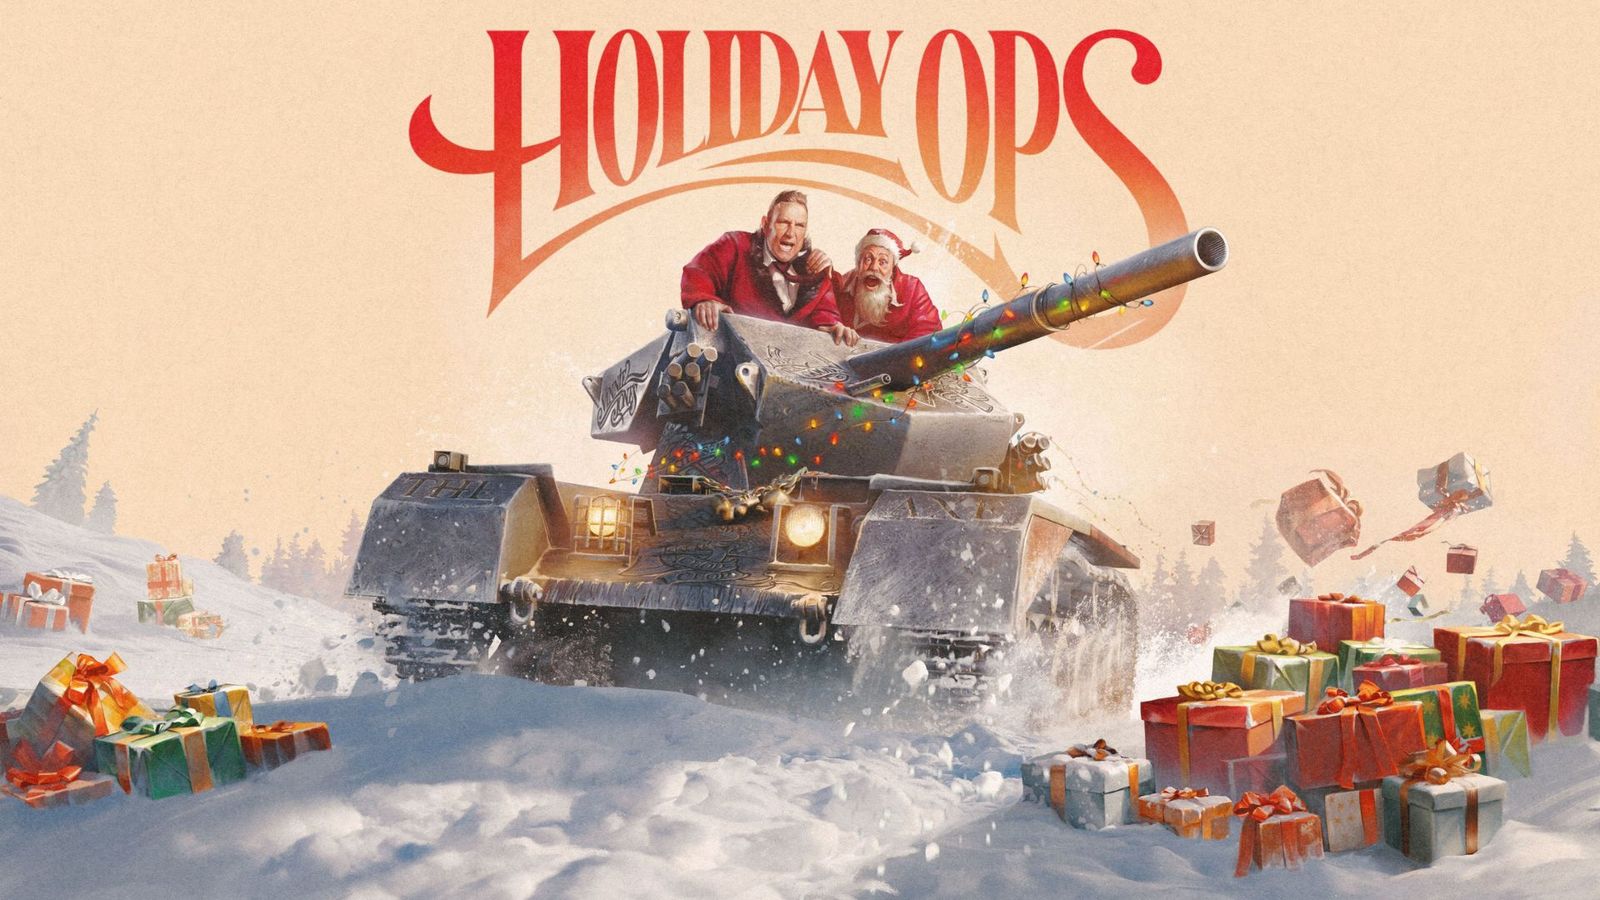 Key art for the Holiday Ops 2024 event